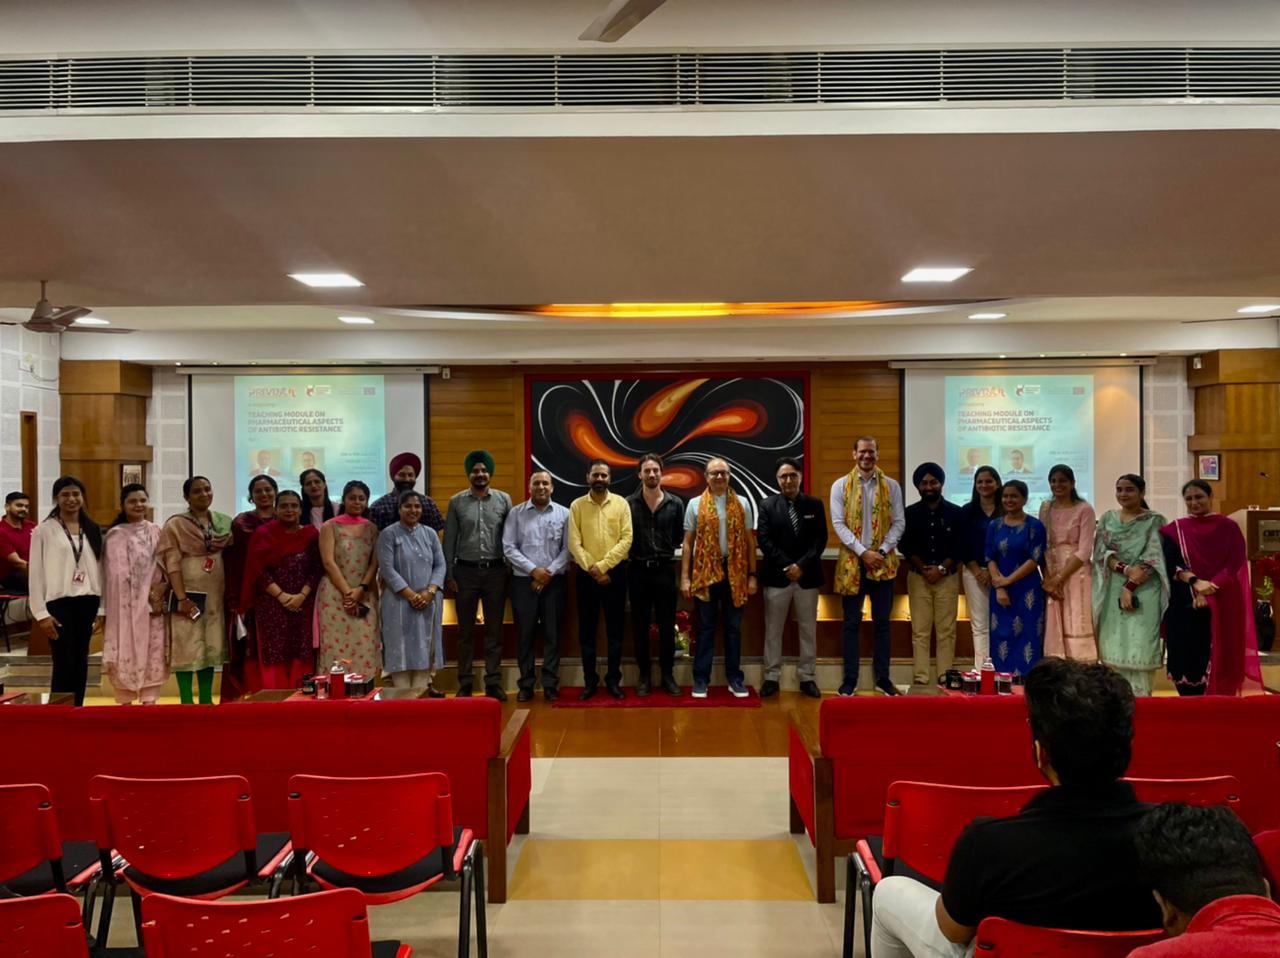 Teaching Module on ‘Join hands to combat Antibiotic Resistance’ by Prof. Paolo Rocco and Prof. Umberto Musazzi at Chitkara University, Punjab, India